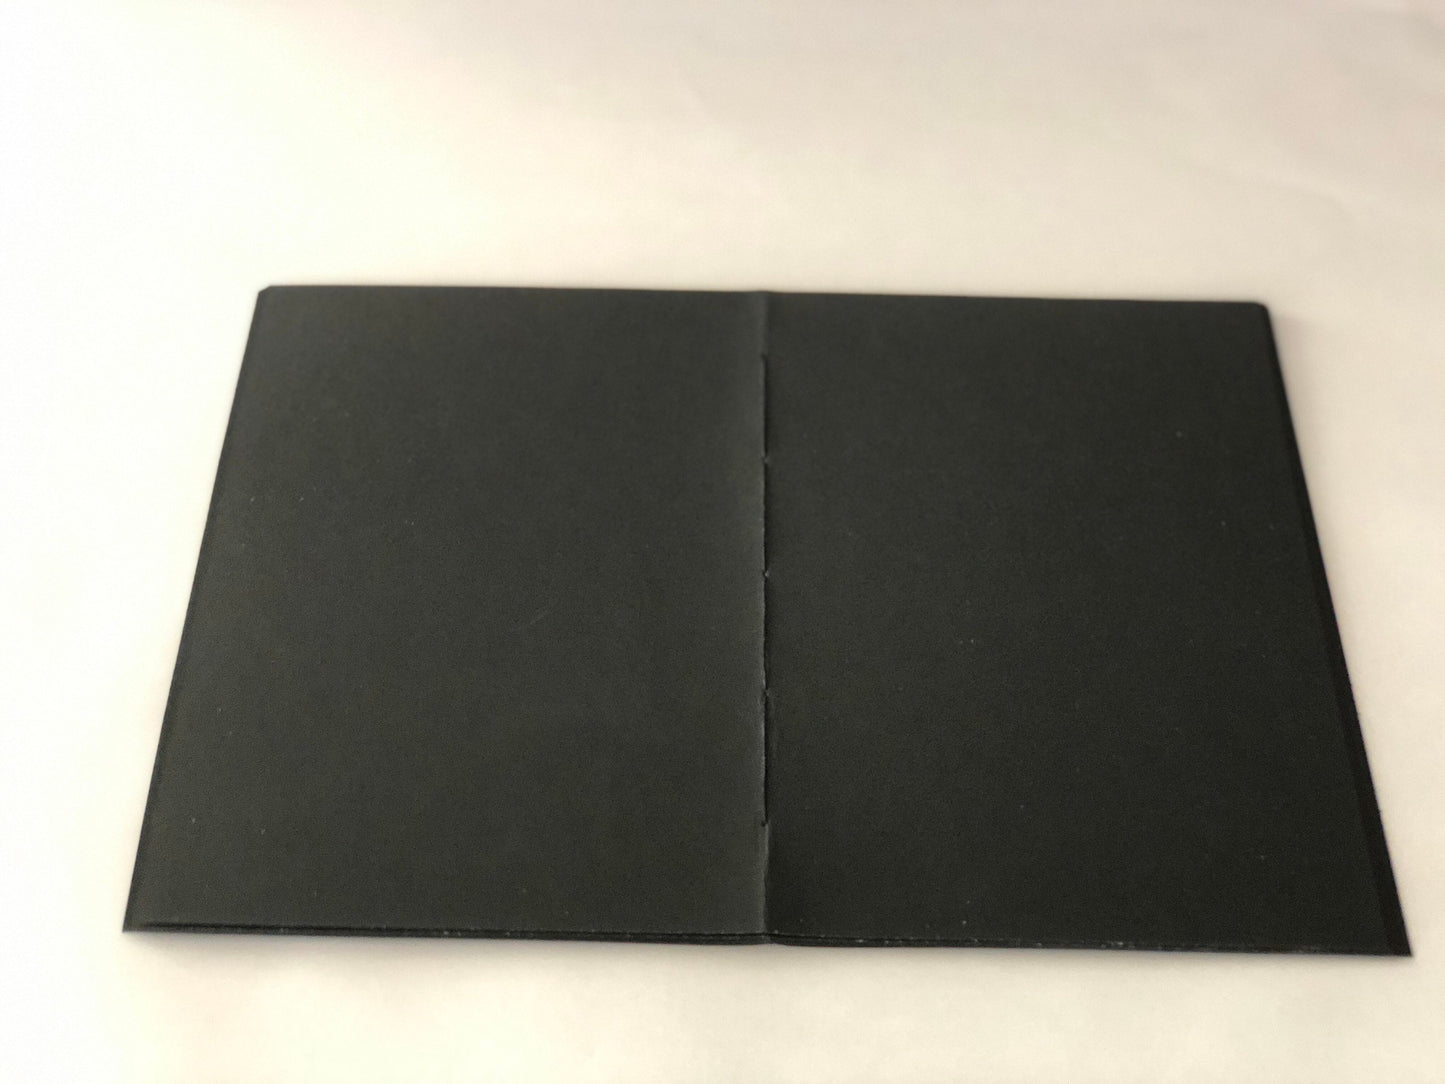 140lbs Black Drawing Paper Sketchbook/ Insert - A5, 42 Pages